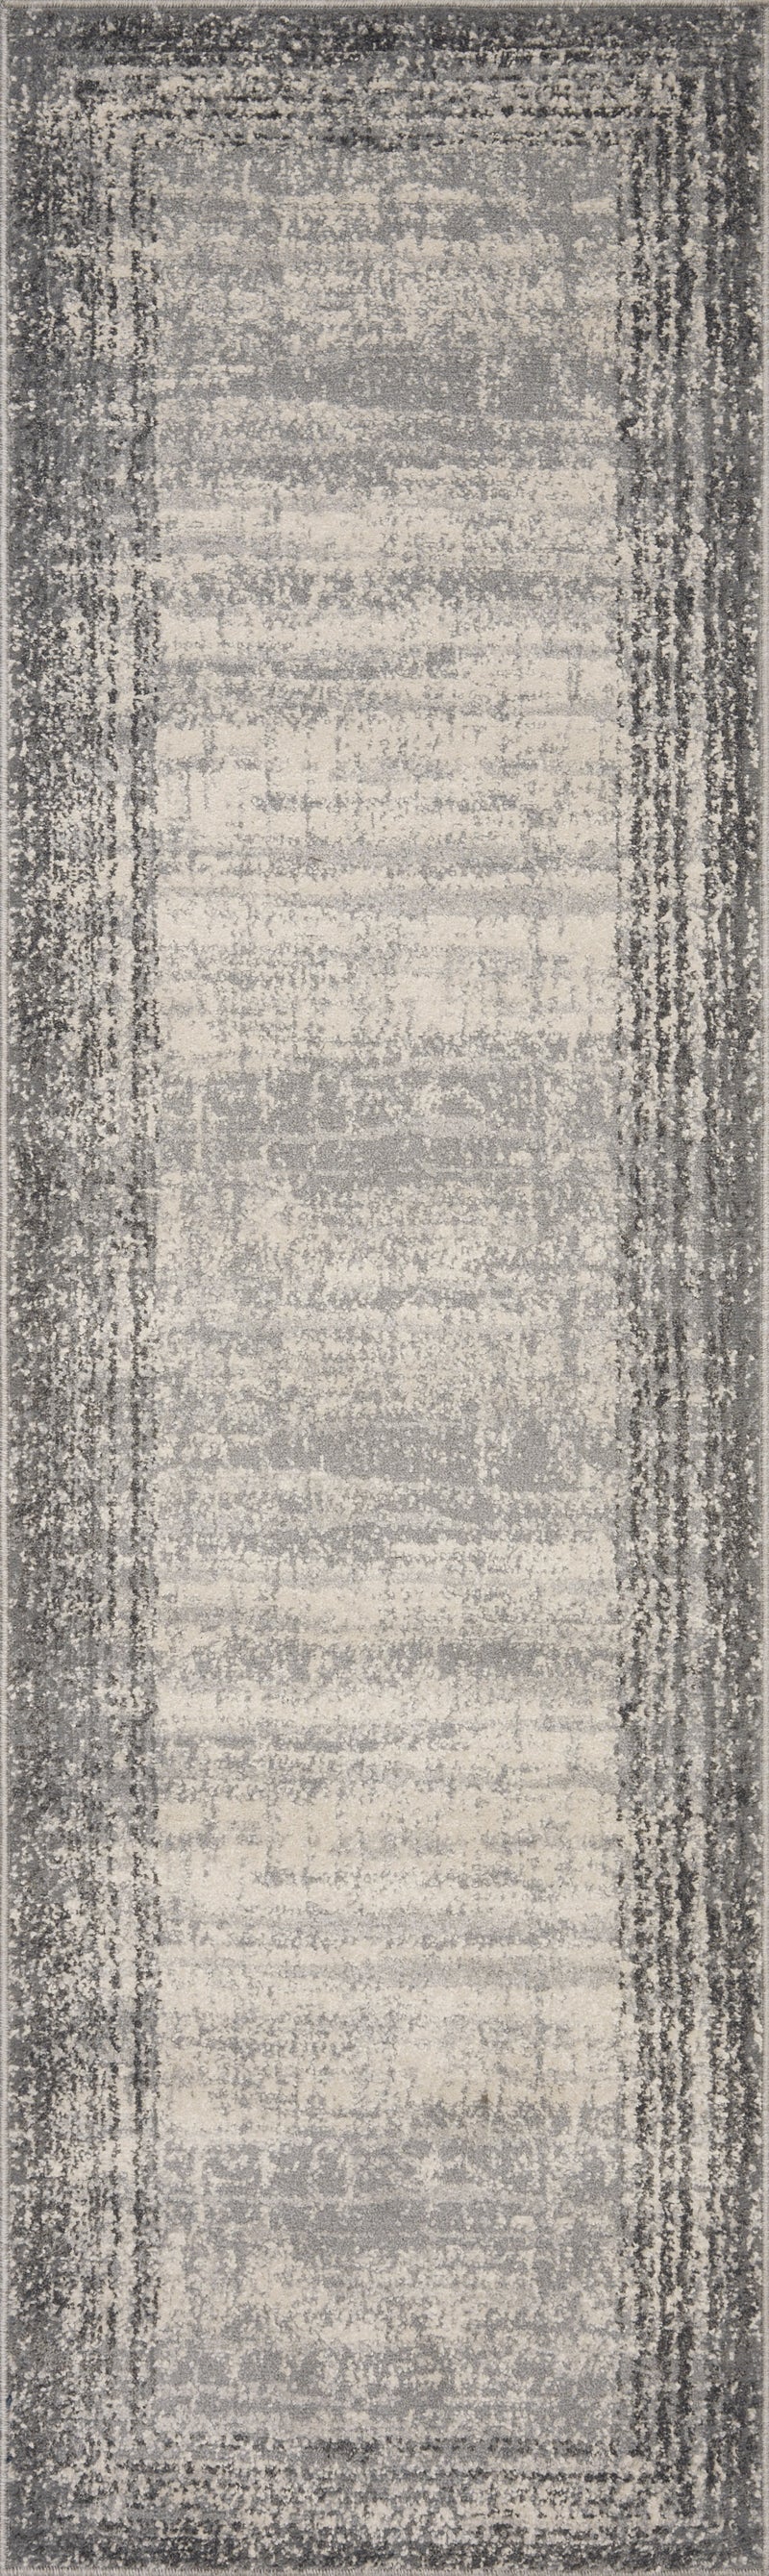 media image for Austen Rug in Pebble / Charcoal by Loloi II 225